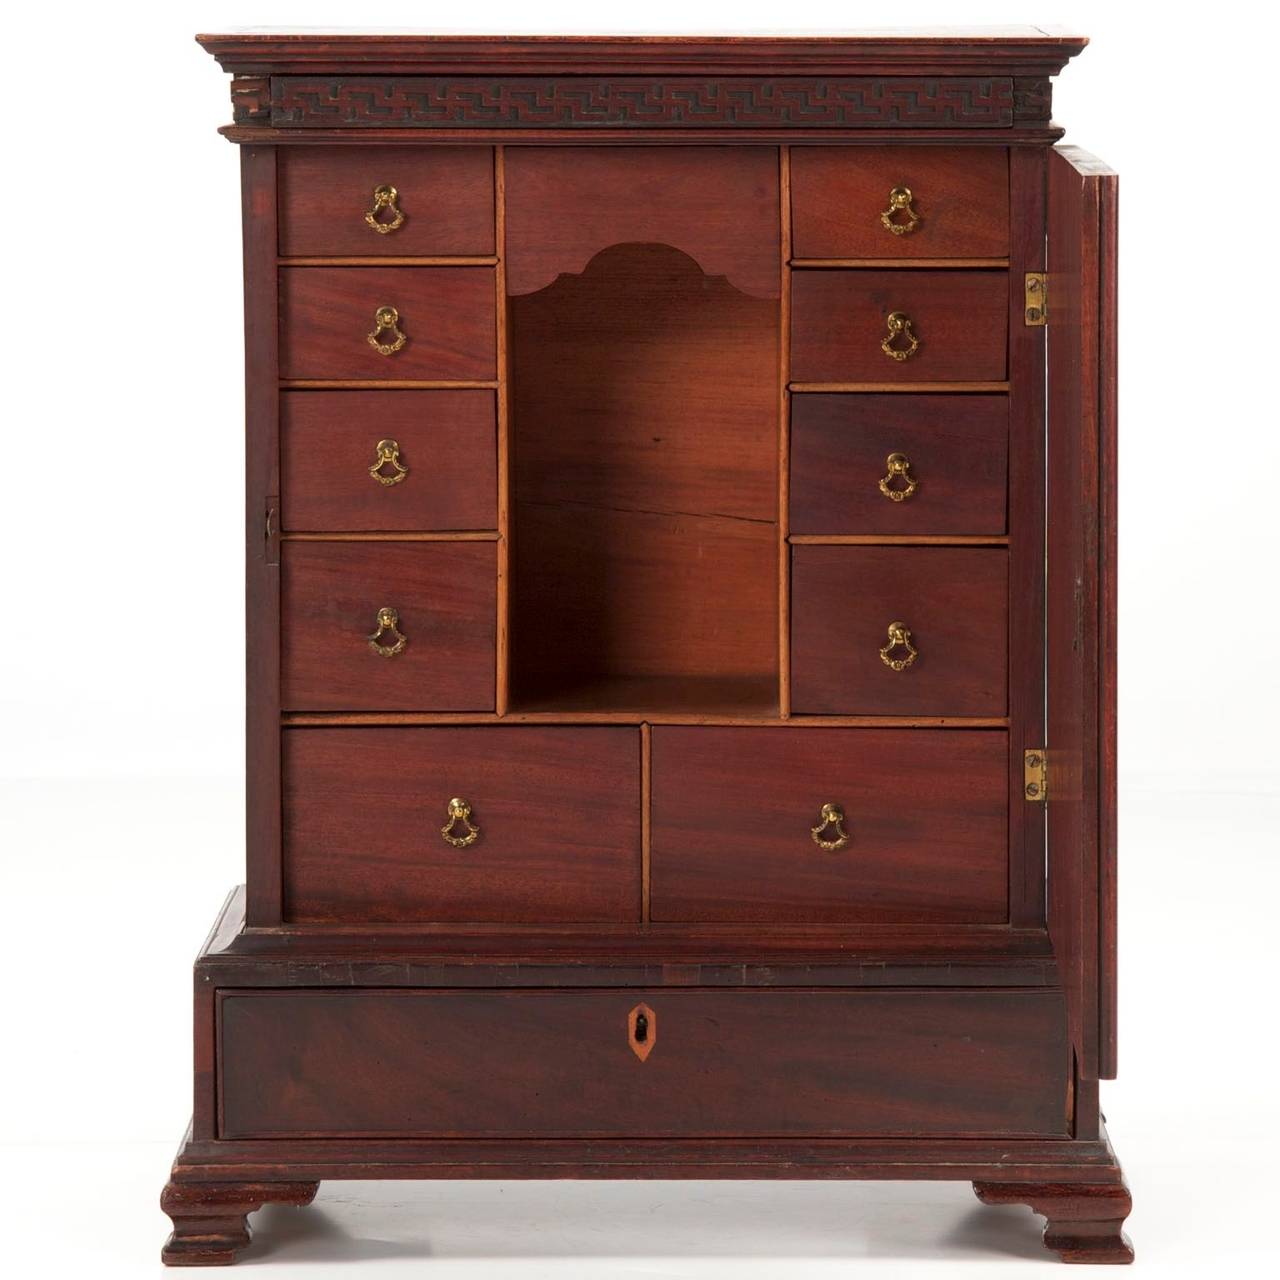 Crafted of wonderfully vibrant mahogany primary woods, this fine English spice cabinet is quite expressive with an unusual sense of presence. The finished top is edged by projecting molding over original and untouched pierced Greek-key fretwork. The